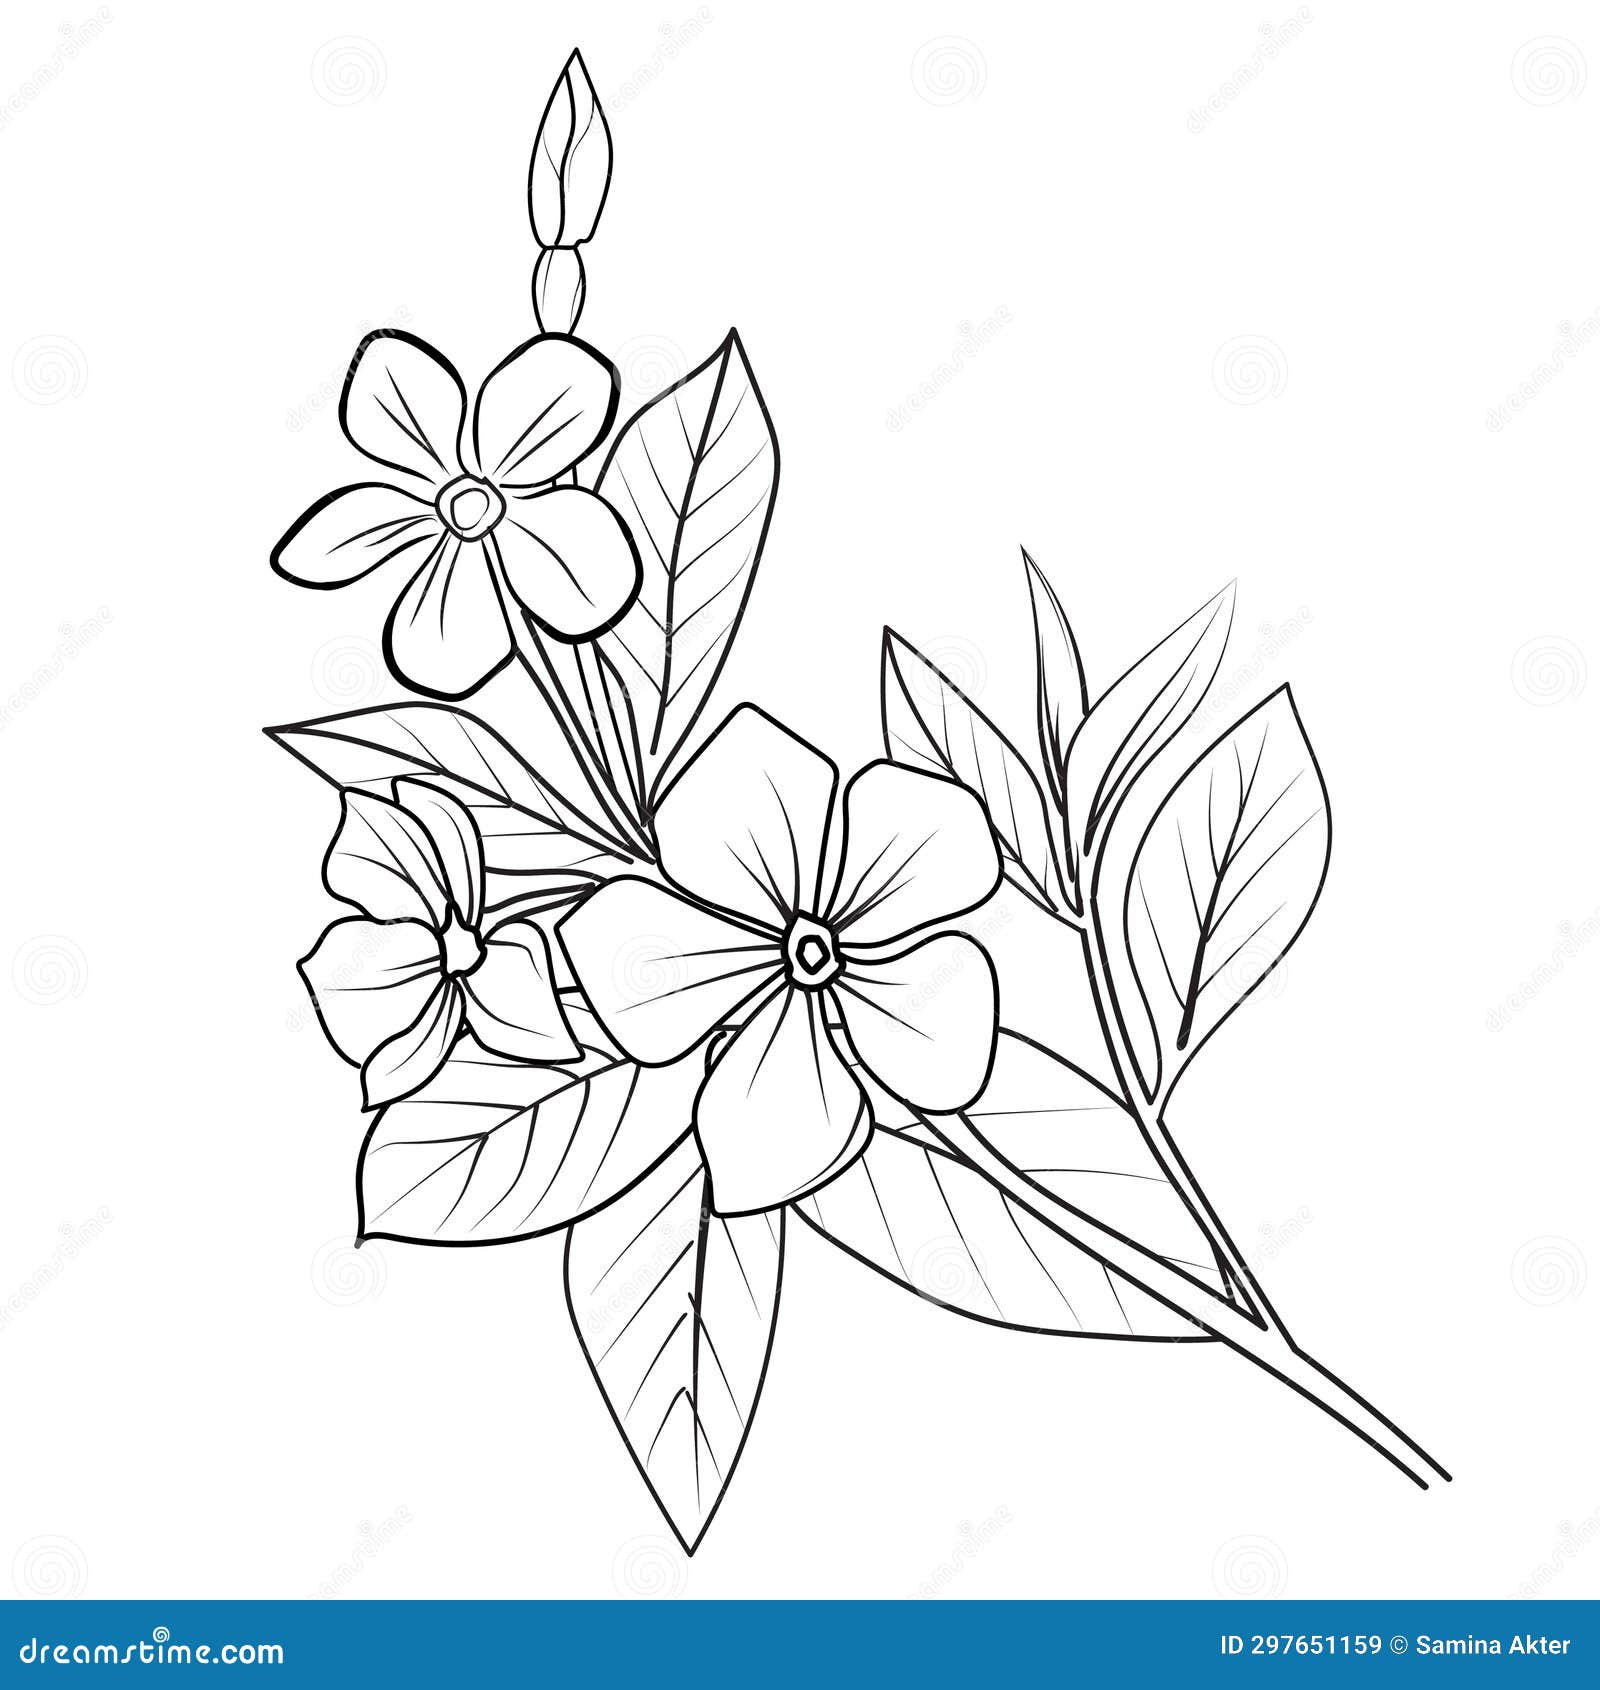 Daisy Flower Drawing Kids Coloring Page With Pencil Line Art Design In  Detailed Vector Graphic Stock Illustration - Download Image Now - iStock